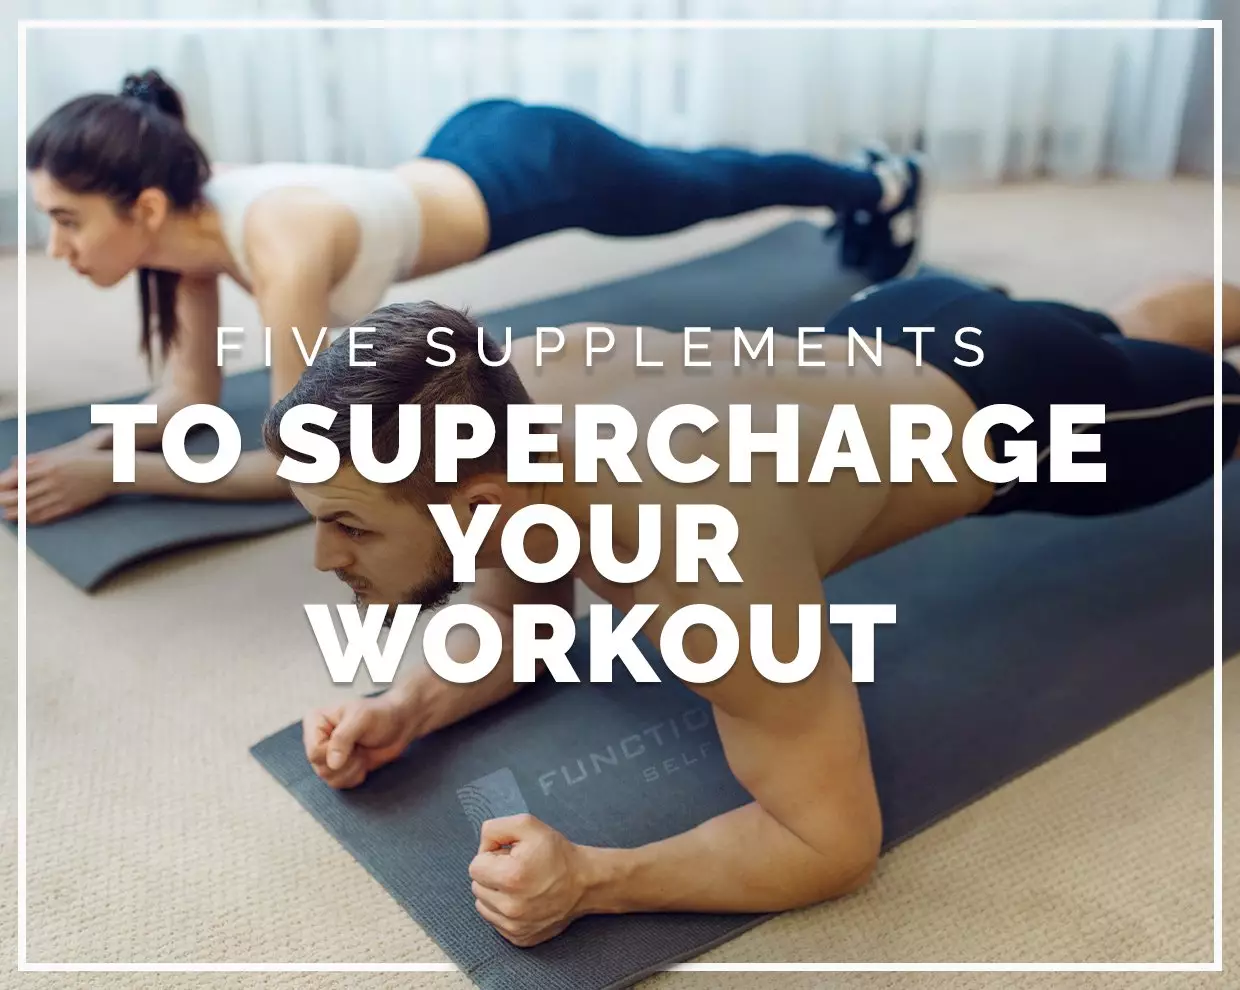 5 Supplements to Supercharge your Pre-Workout and Post-Workout